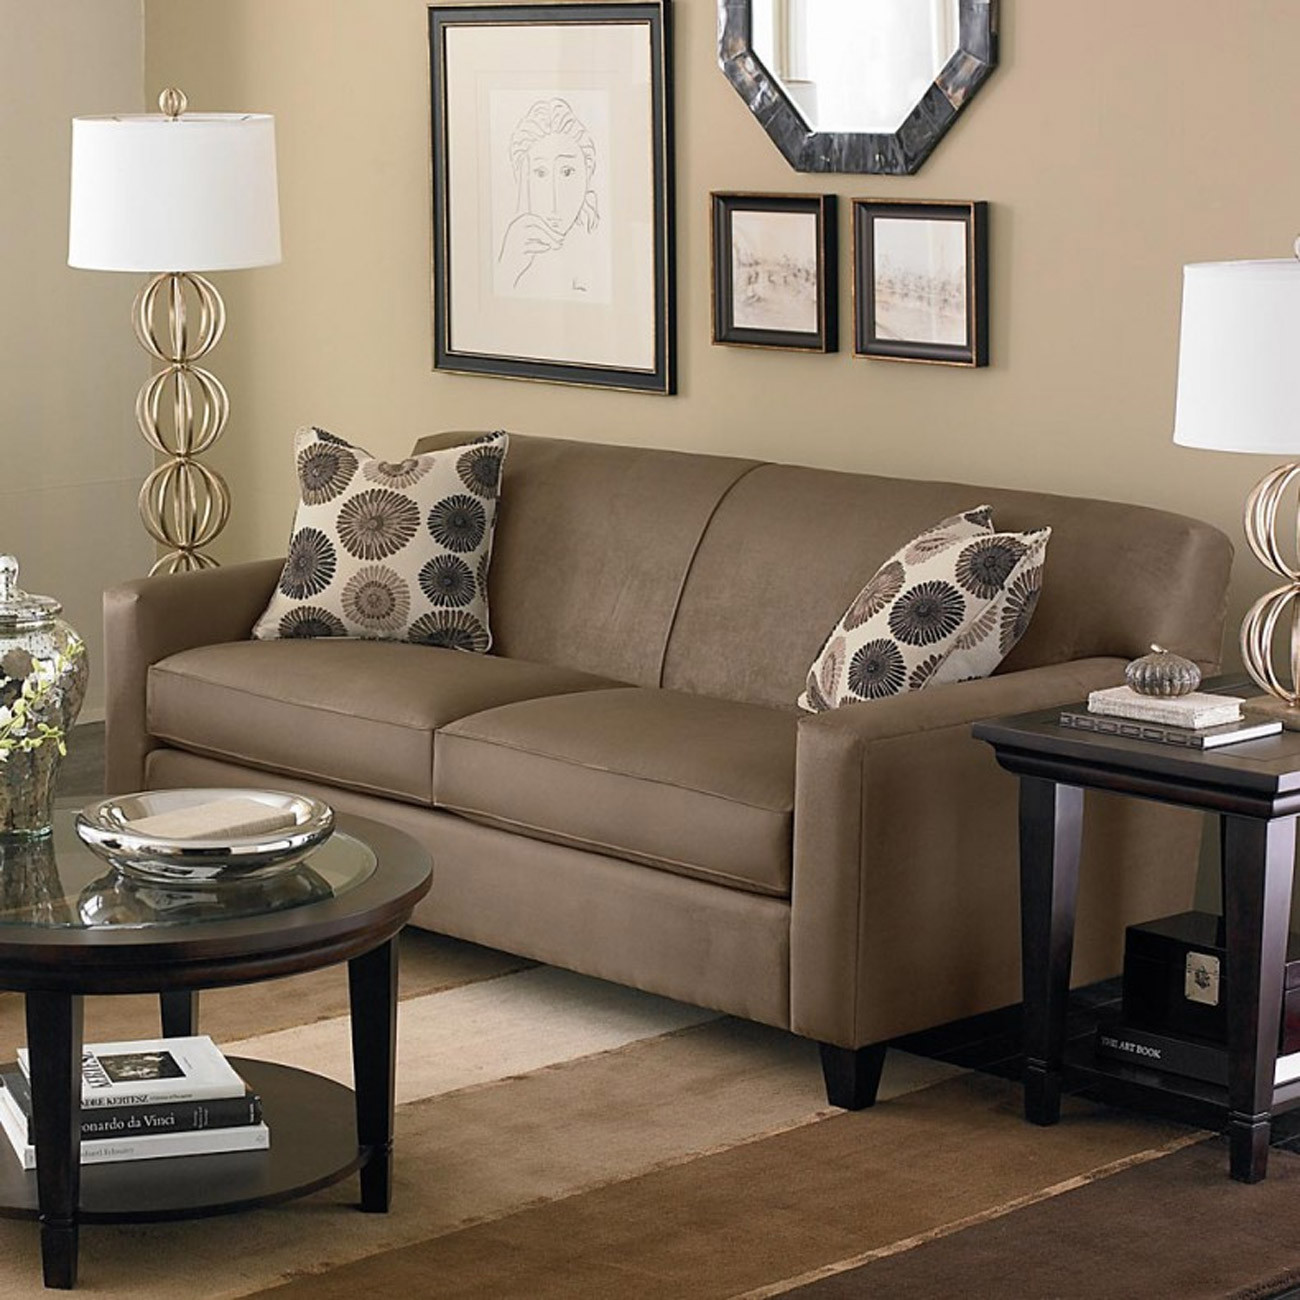 Living Room Sofa Ideas
 Find Suitable Living Room Furniture With Your Style